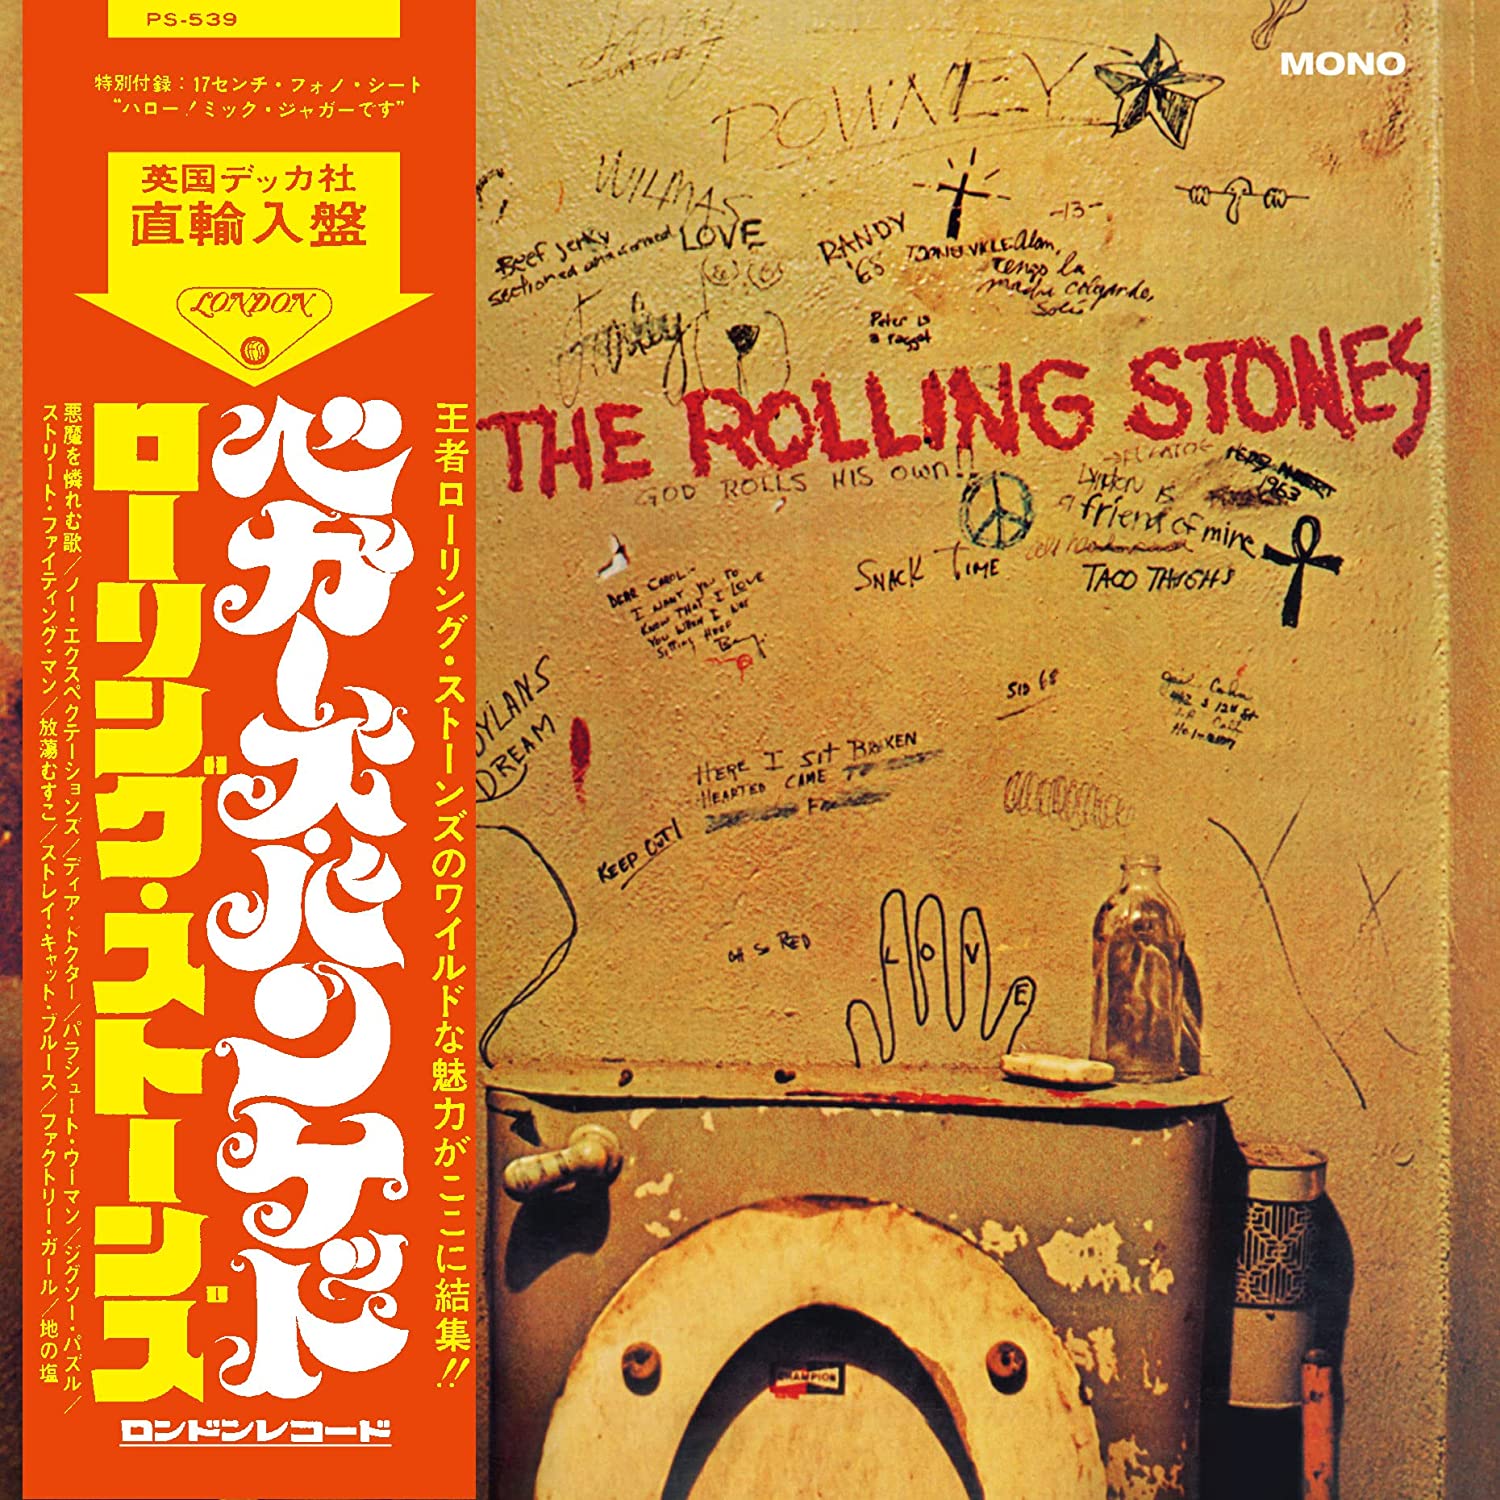 Beggars Banquet | The Rolling Stones image